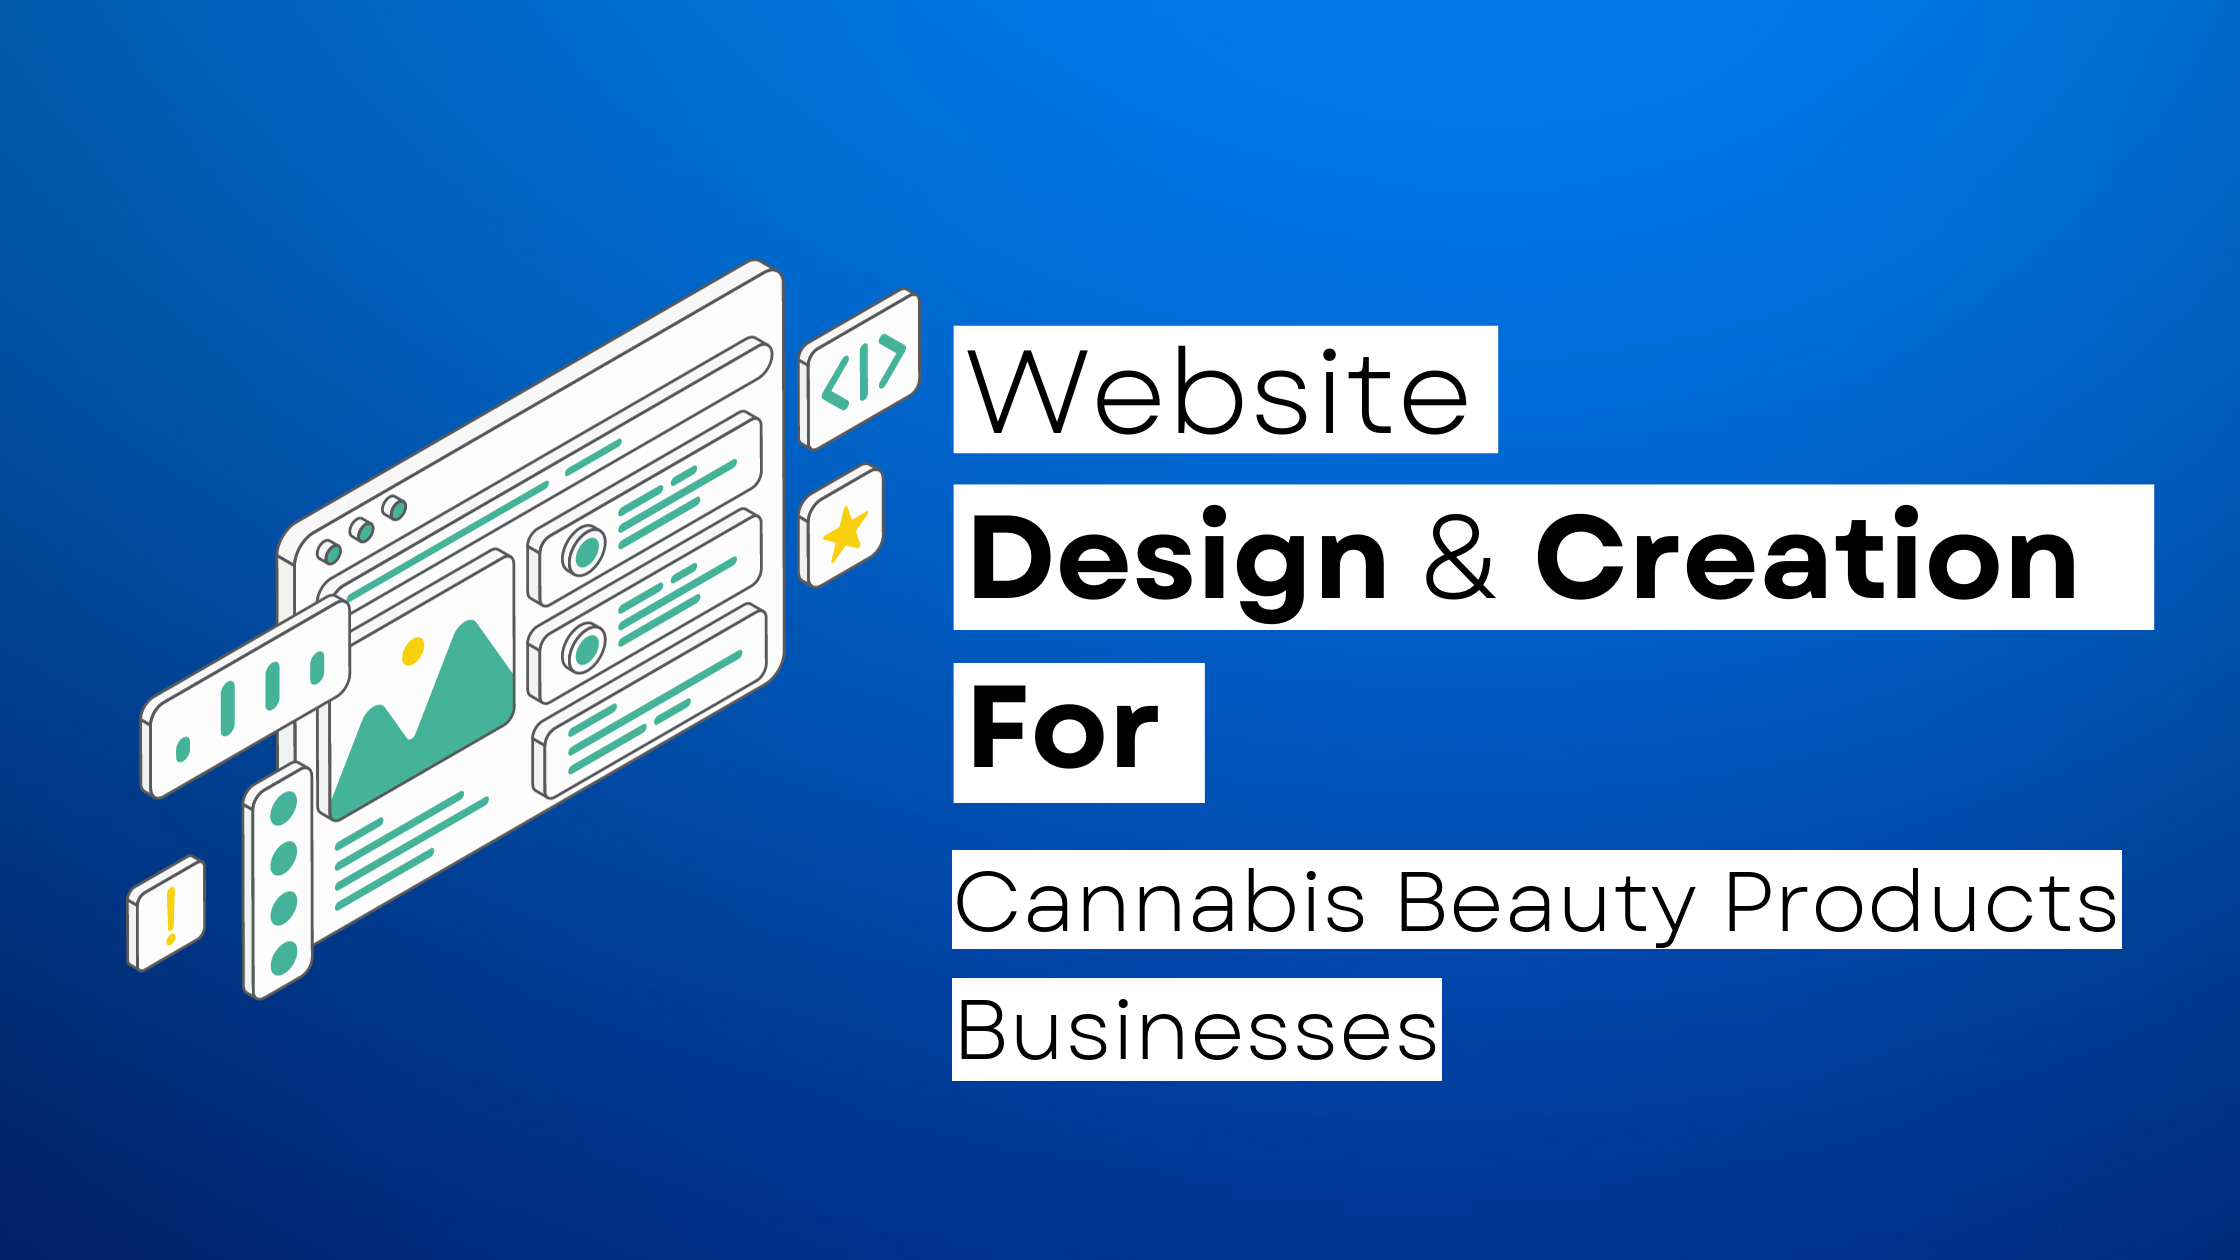 How to start a Cannabis Beauty Products website